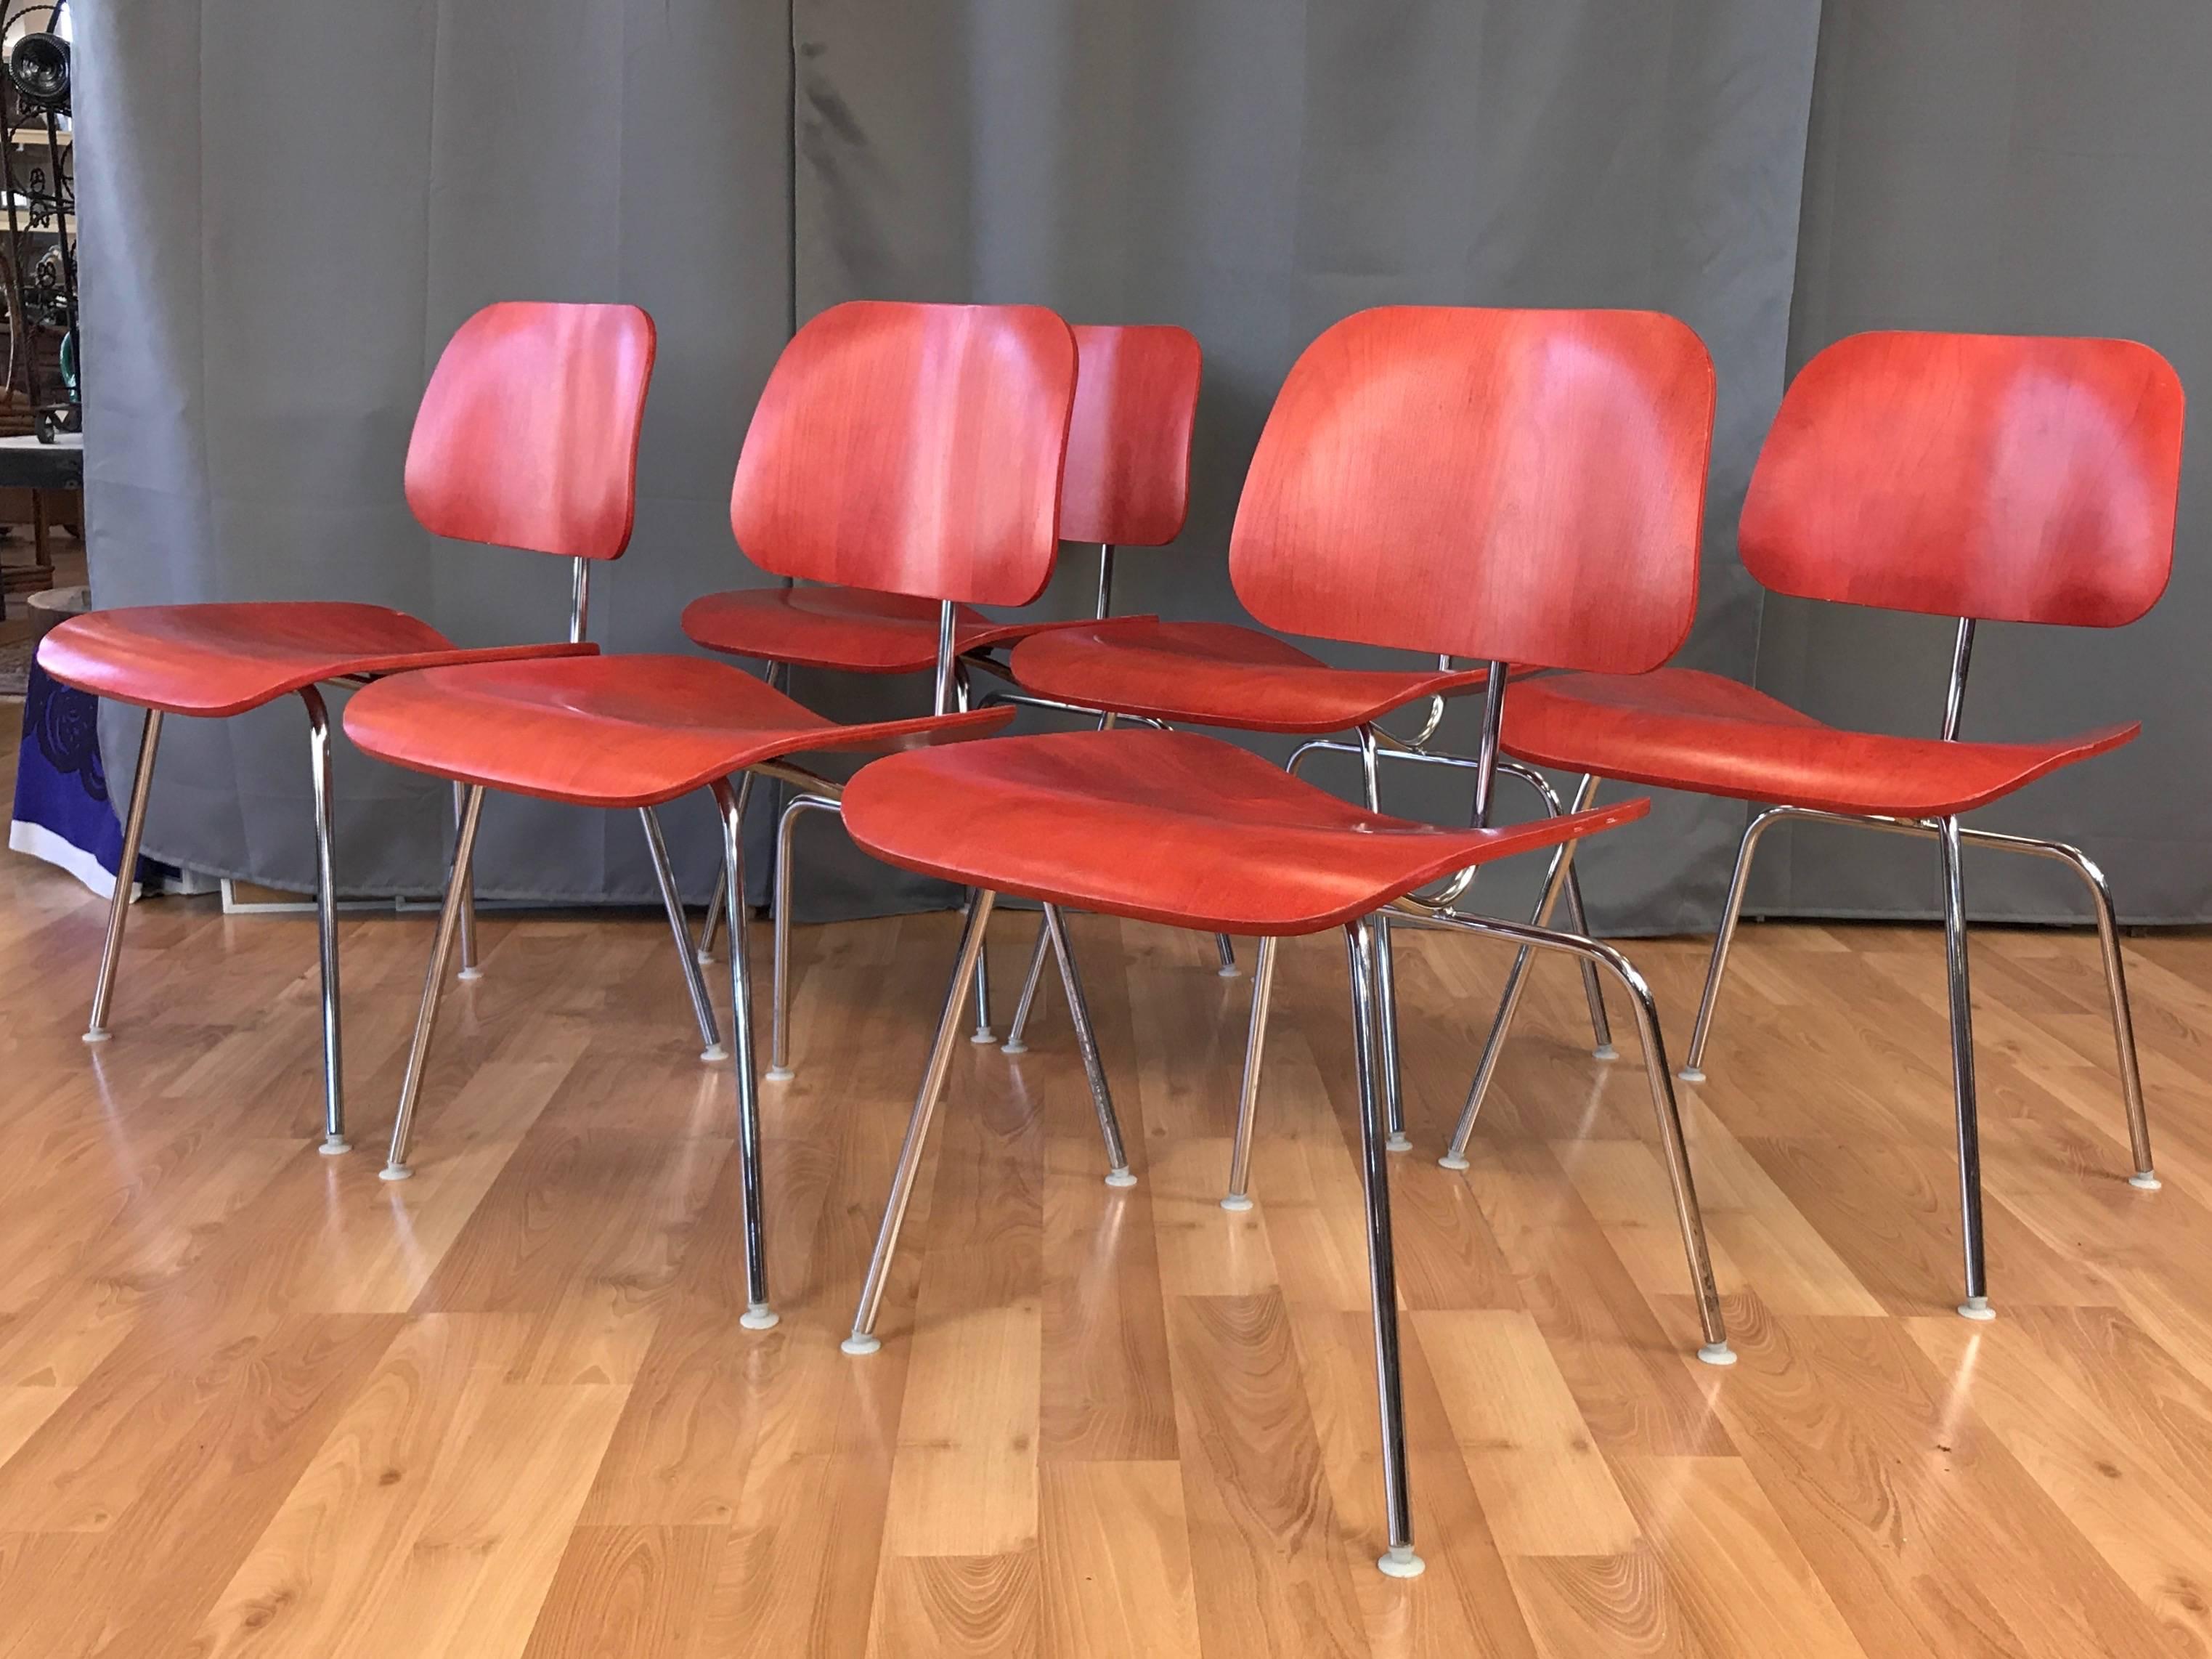 ***We only have one chair left***

A newer production aniline red DCM chair by Charles and Ray Eames for Herman Miller, offered individually.

Introduced in 1946, this example of the quintessential mid-century modern design classic was produced in